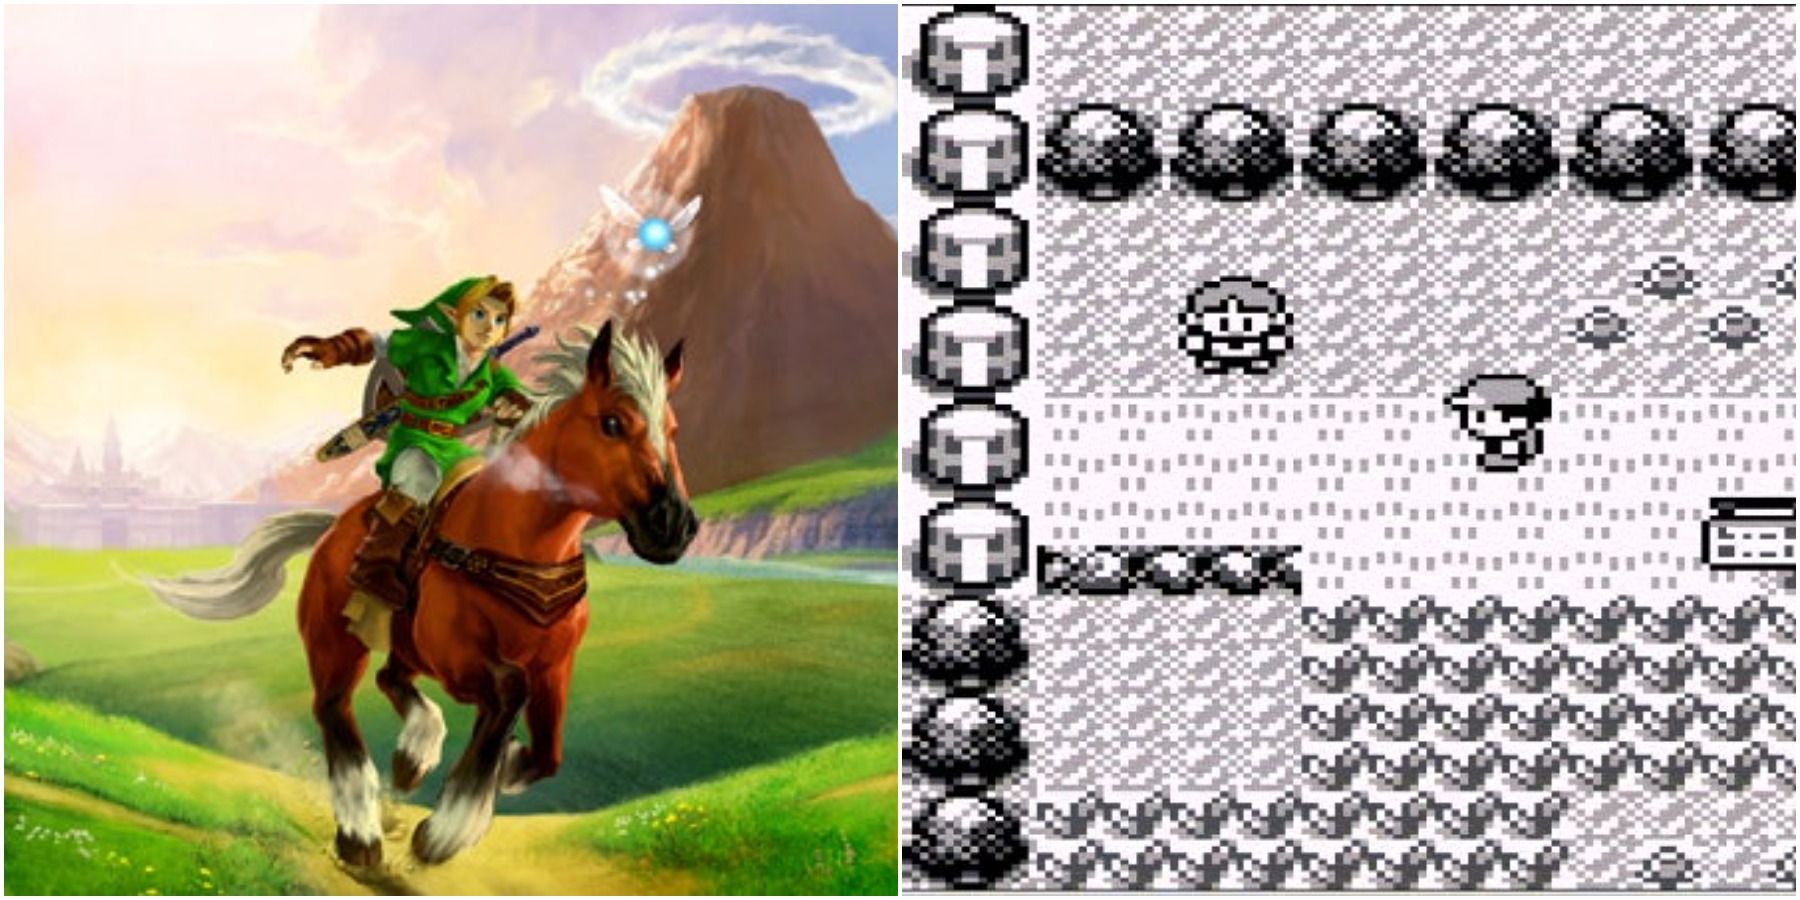 (Left) Link riding Epona (Right) Two people standing in a field